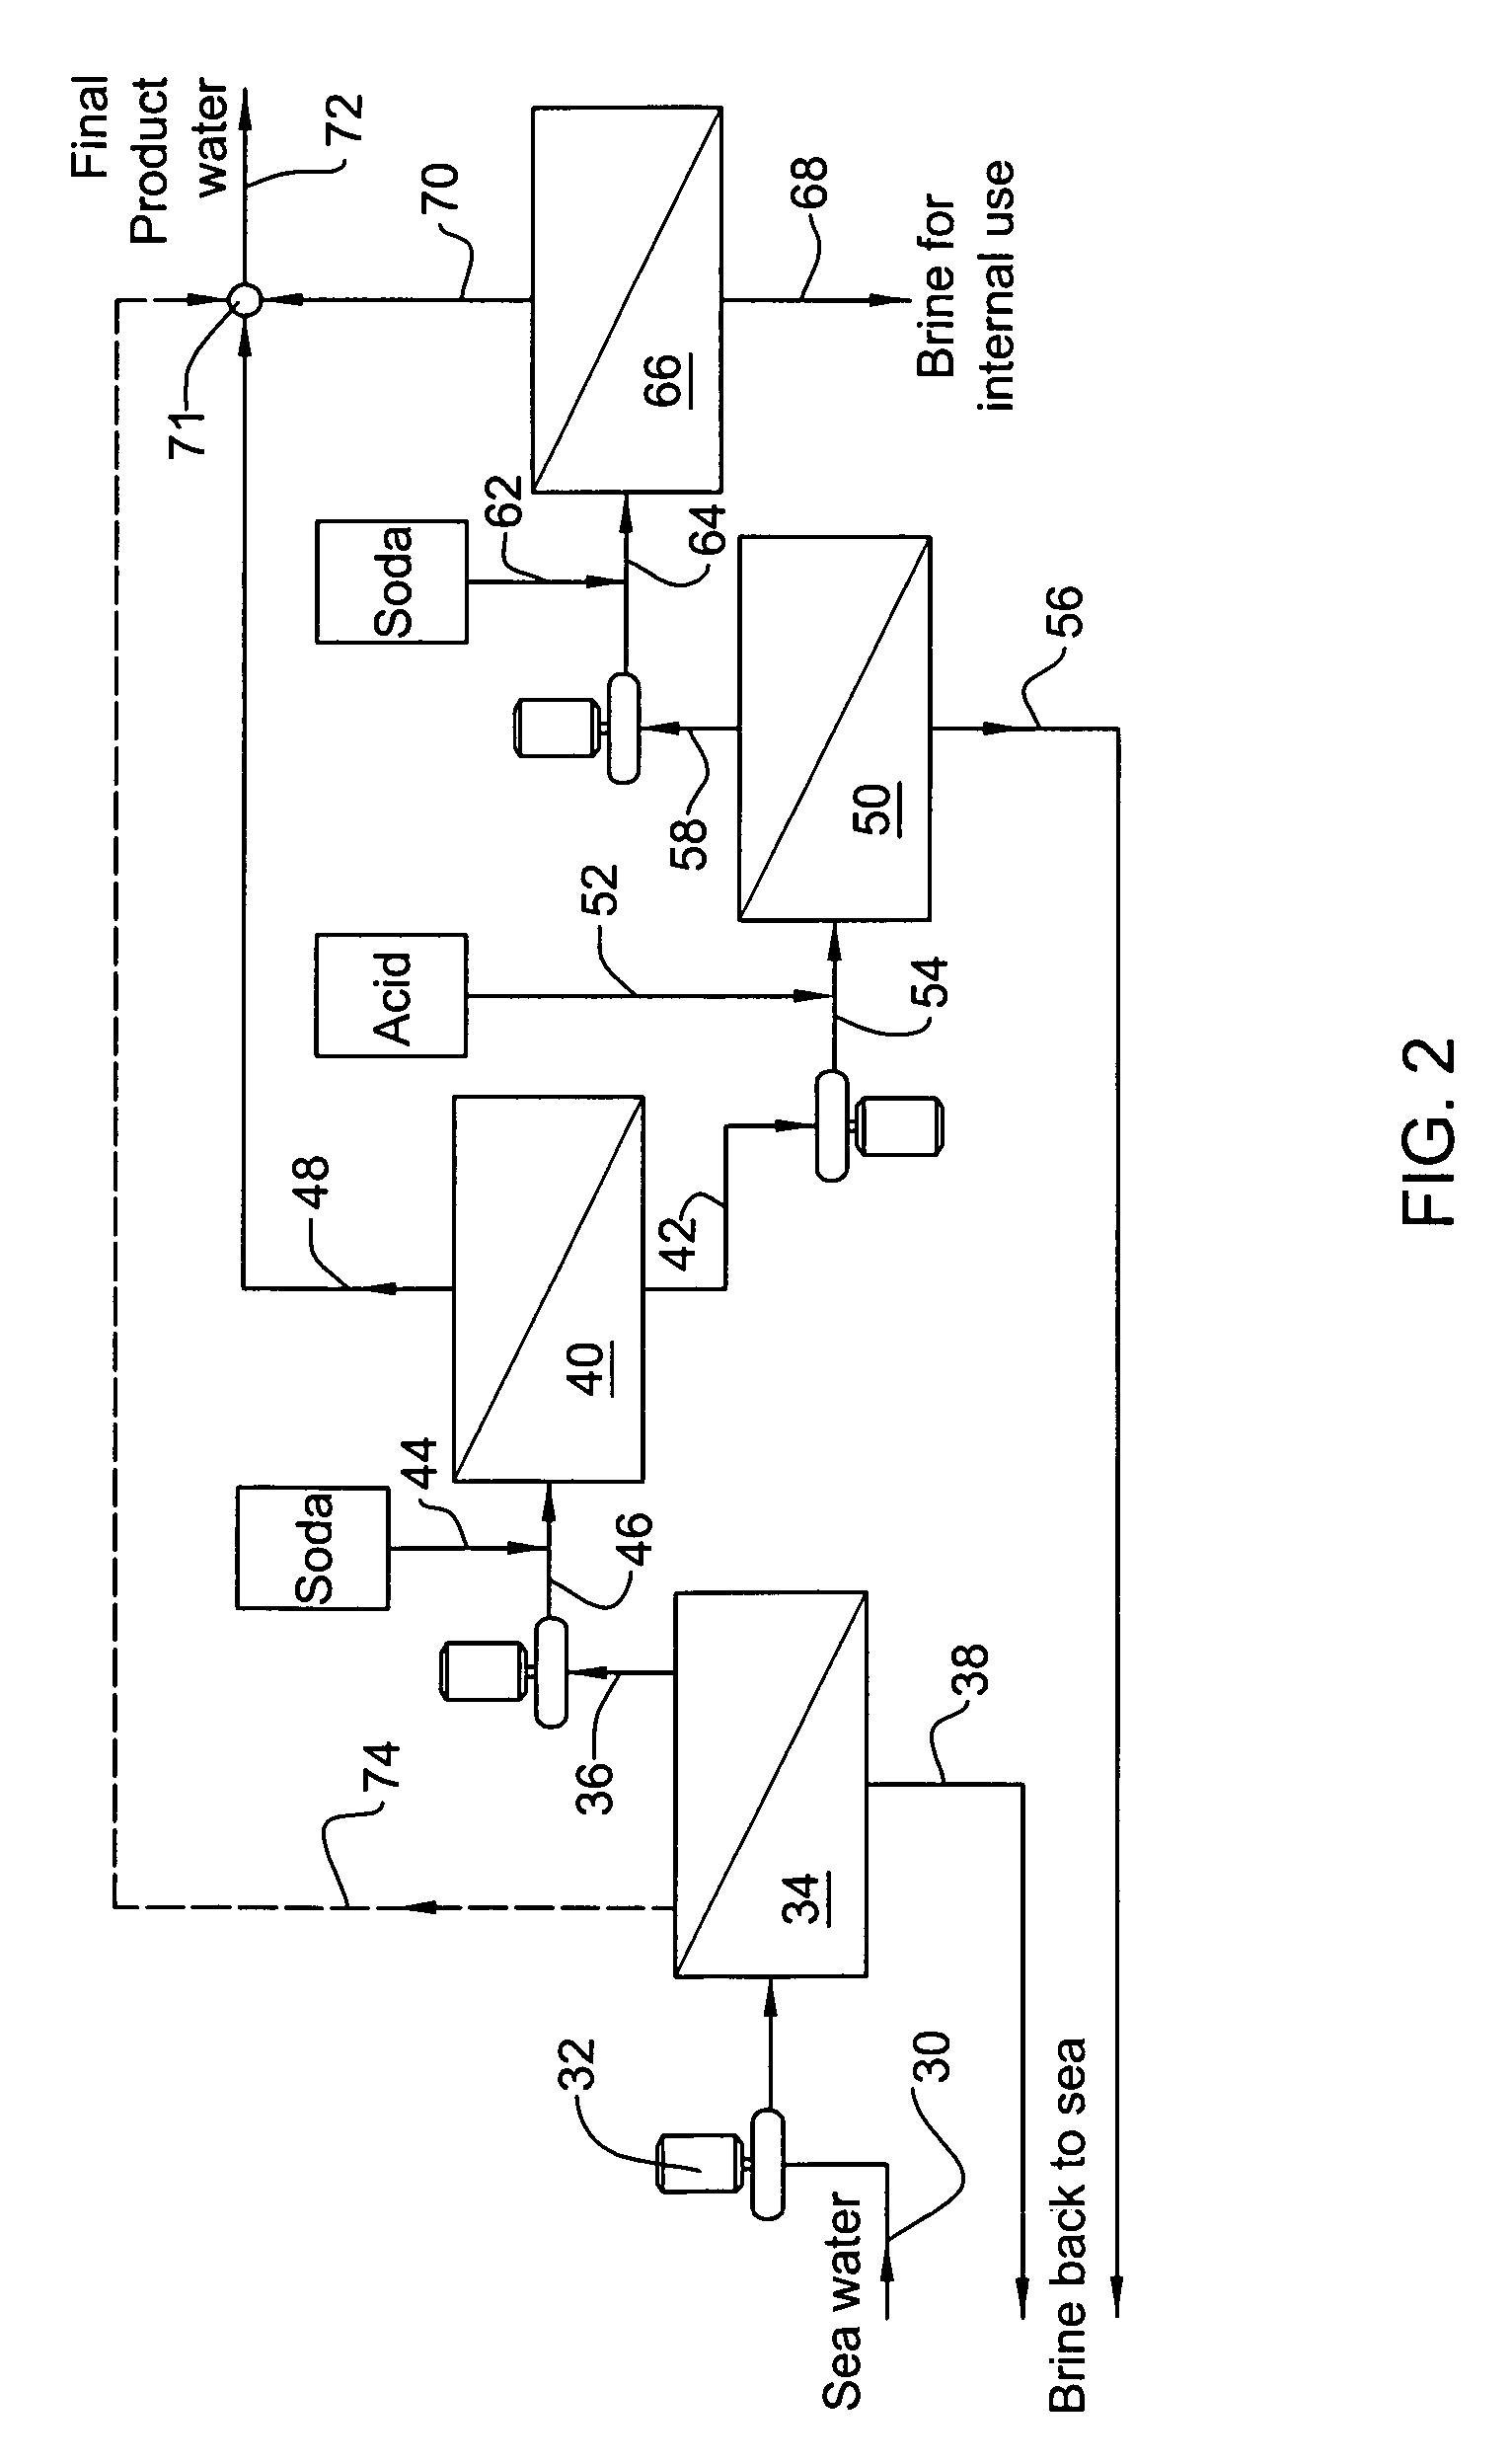 Method of boron removal in presence of magnesium ions